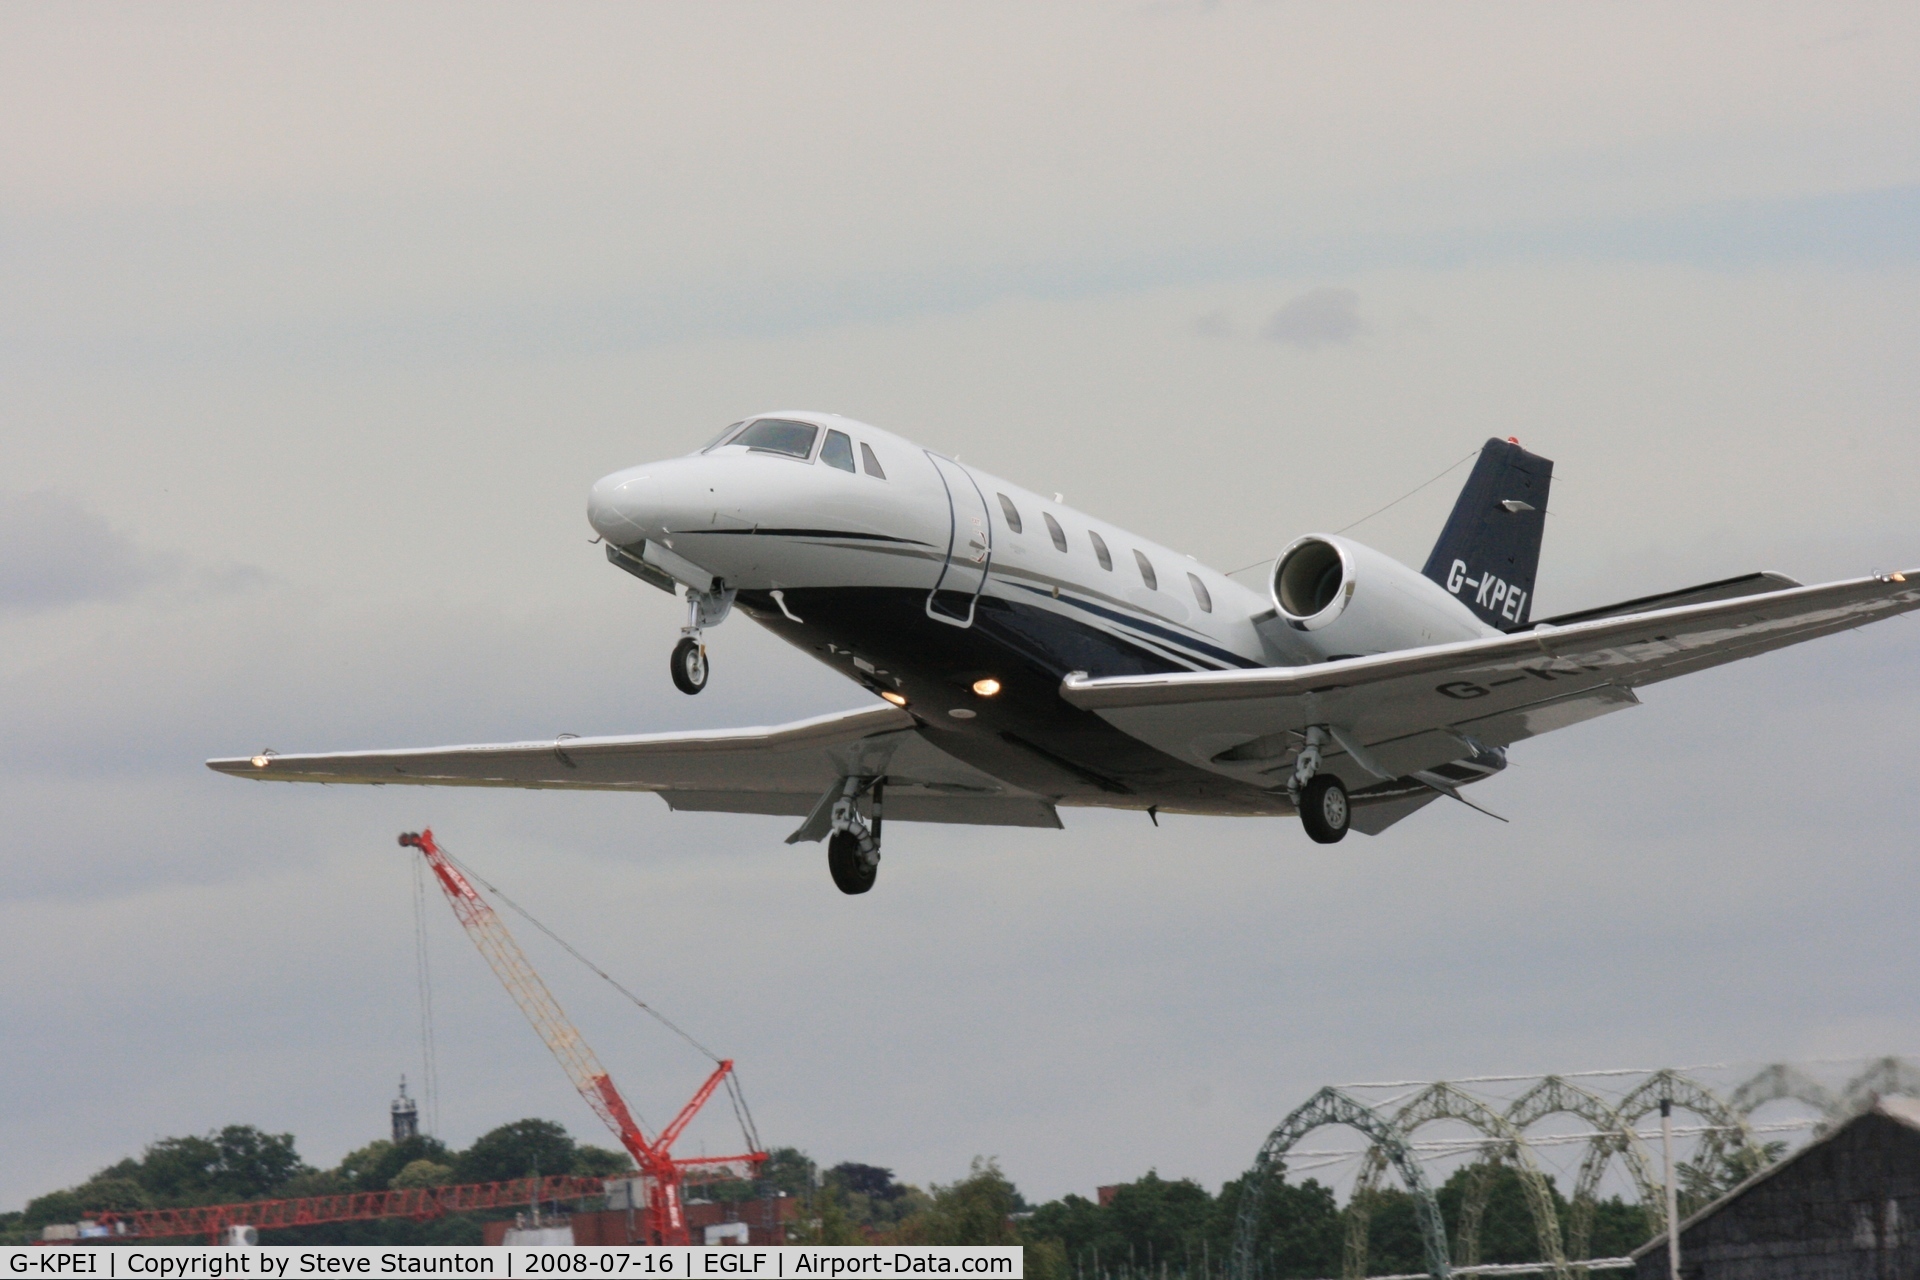 G-KPEI, 2008 Cessna 560XL Citation XLS C/N 560-5785, Taken at Farnborough Airshow on the Wednesday trade day, 16th July 2009